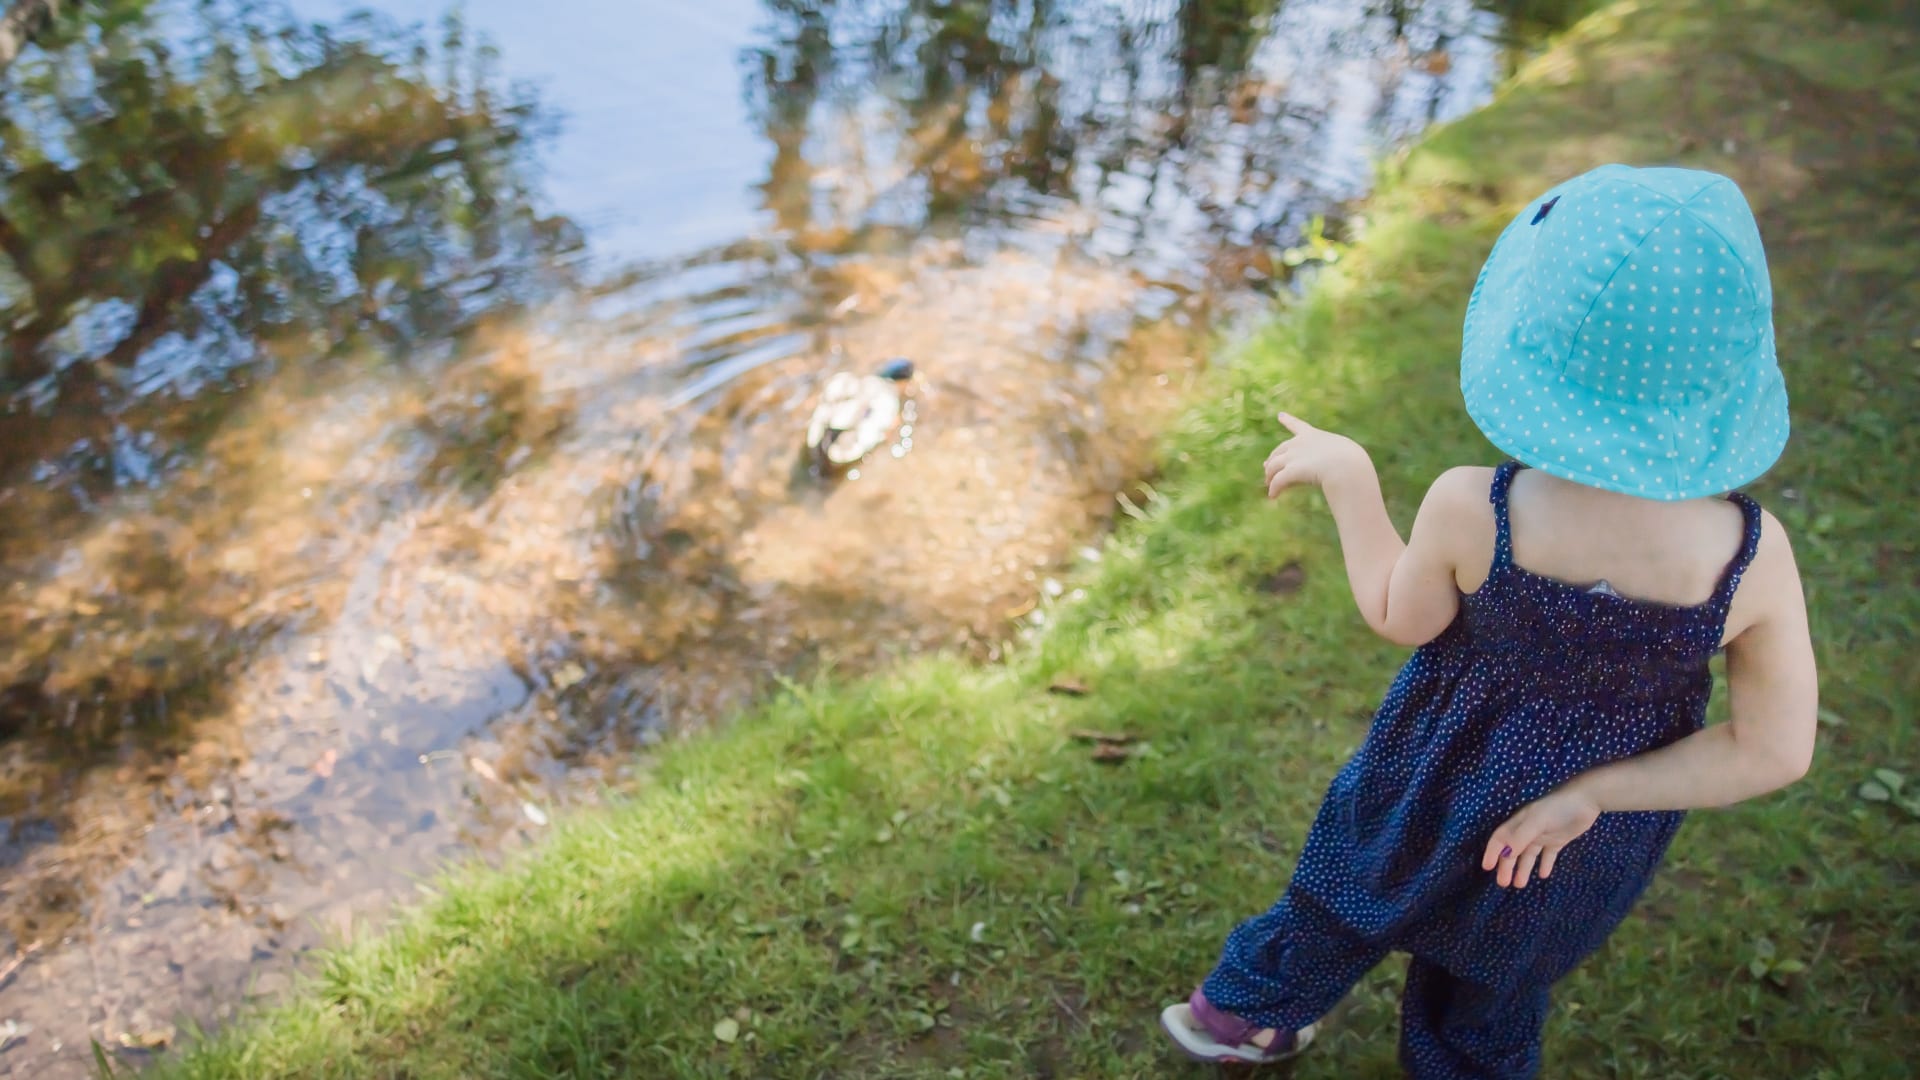 Child looking at a duck in a pond.